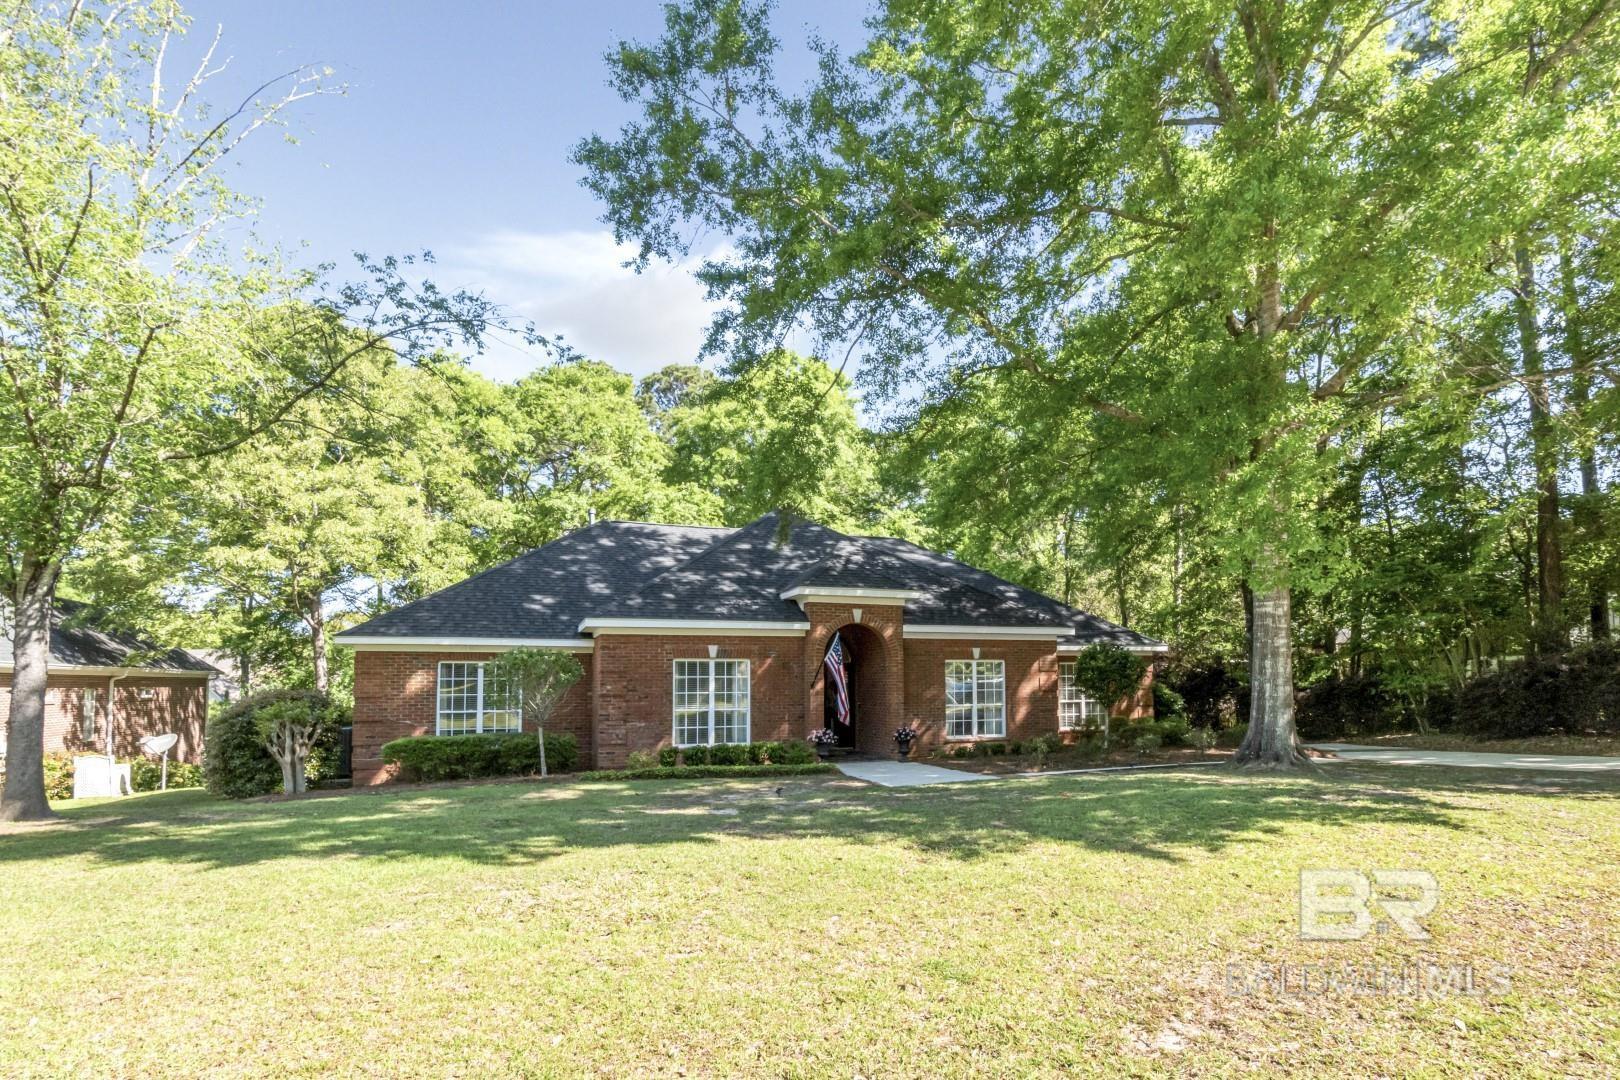 WELCOME HOME to 8737 Ash Ct located on a quiet cul de sac in Timber Creek! This all brick family home with over 3100 sq boasts 4 BR, 3.5 B, bonus and side entry double garage with workshop space. The lovely covered entrance leads into a foyer flanked by French doors to a living/office/play/flex room and dining room; The expansive, sunny great room features wood flooring, a fire place, large windows that open to the covered back porch and deck overlooking a private backyard. Off the great room is the spacious kitchen with ceramic tile, granite counters, cabinets galore, and eating bar; the kitchen opens to the breakfast area, powder room, door to laundry room with sink and stairs up to the bonus room. The split floor plan features a guest room, guest bath plus the primary bedroom with wood flooring, custom built-ins and ensuite bath with spa tub, shower, large vanity with double sinks and 2 walk in closets! The opposite guest/children’s wing features 2 bedrooms with new wood flooring and a large shared bath. If indoor and outdoor entertaining spaces is what you need in your next home…..look no further! Termite bond with Arrow. BONUSES: FORTIFIED ROOF (2021); HVAC (2023); TimberCreek amenities include two pools, tennis courts (pickle ball), and a clubhouse, all conveniently located near I-10, shopping, and within the highly sought after Spanish Fort School District. Don't miss out on this opportunity. This home will exceed your expectations! Schedule your showing today!